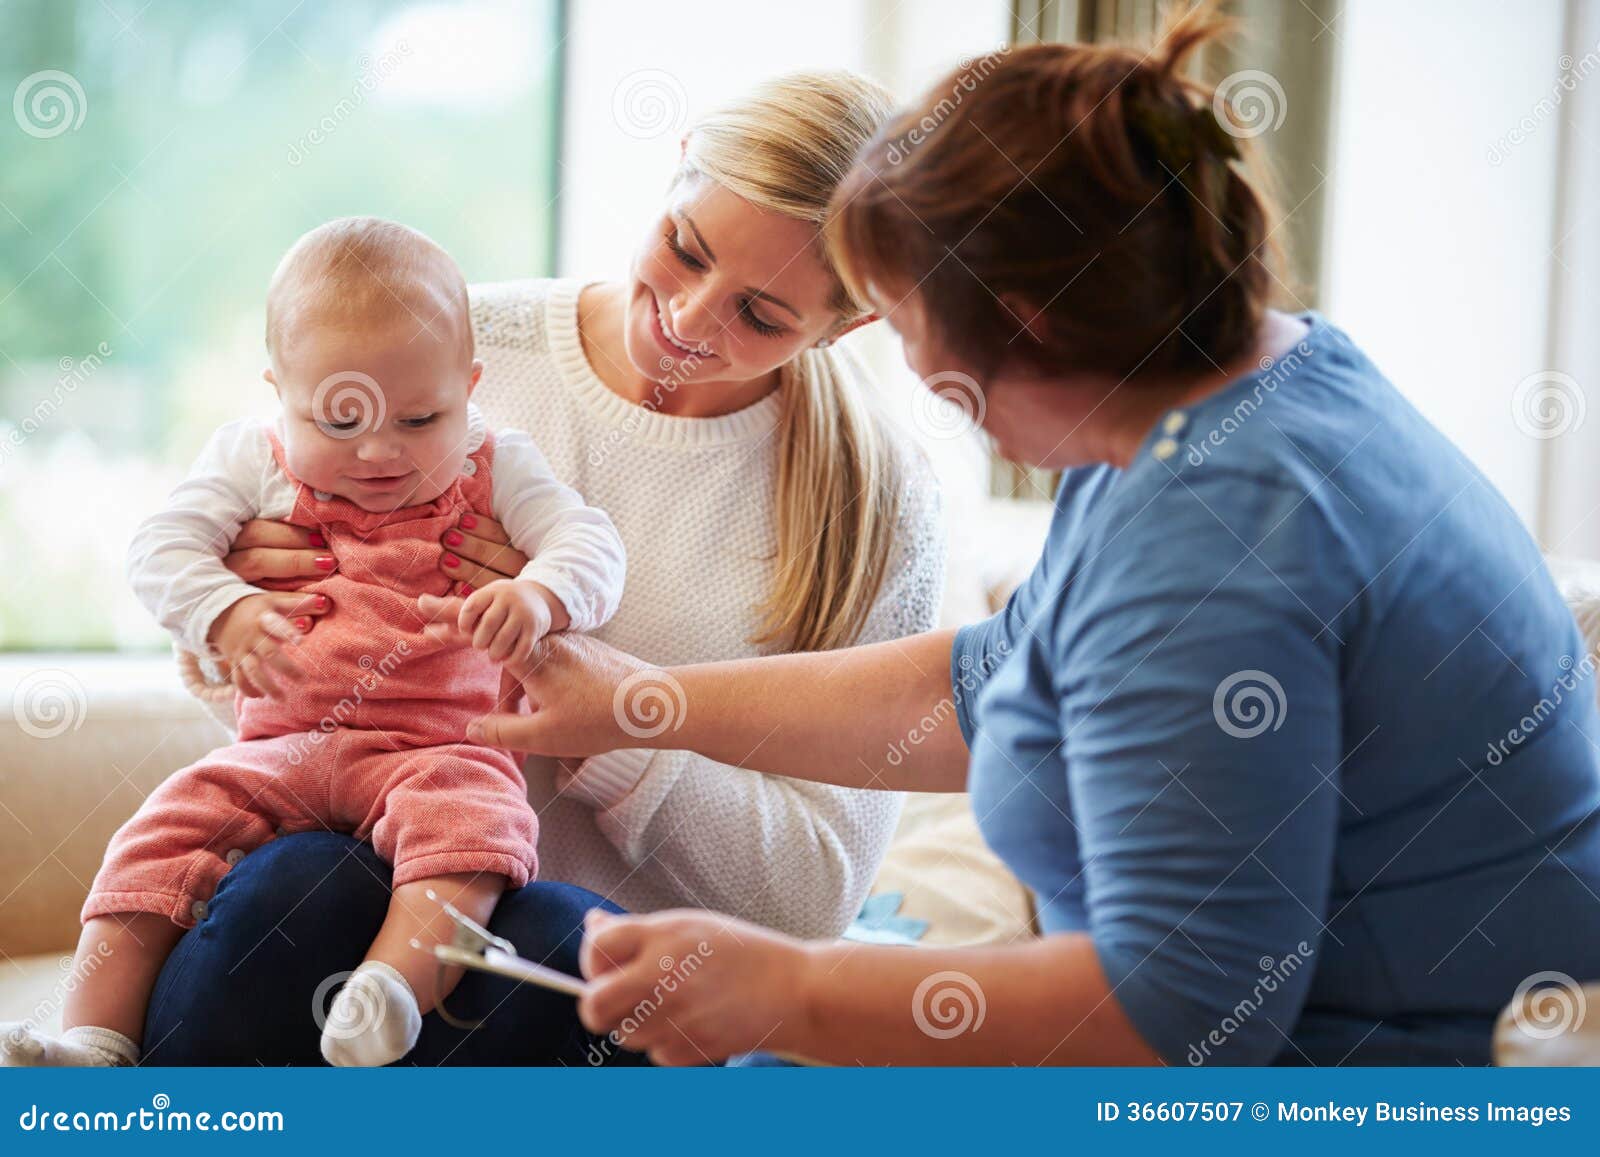 health visitor talking to mother with young baby